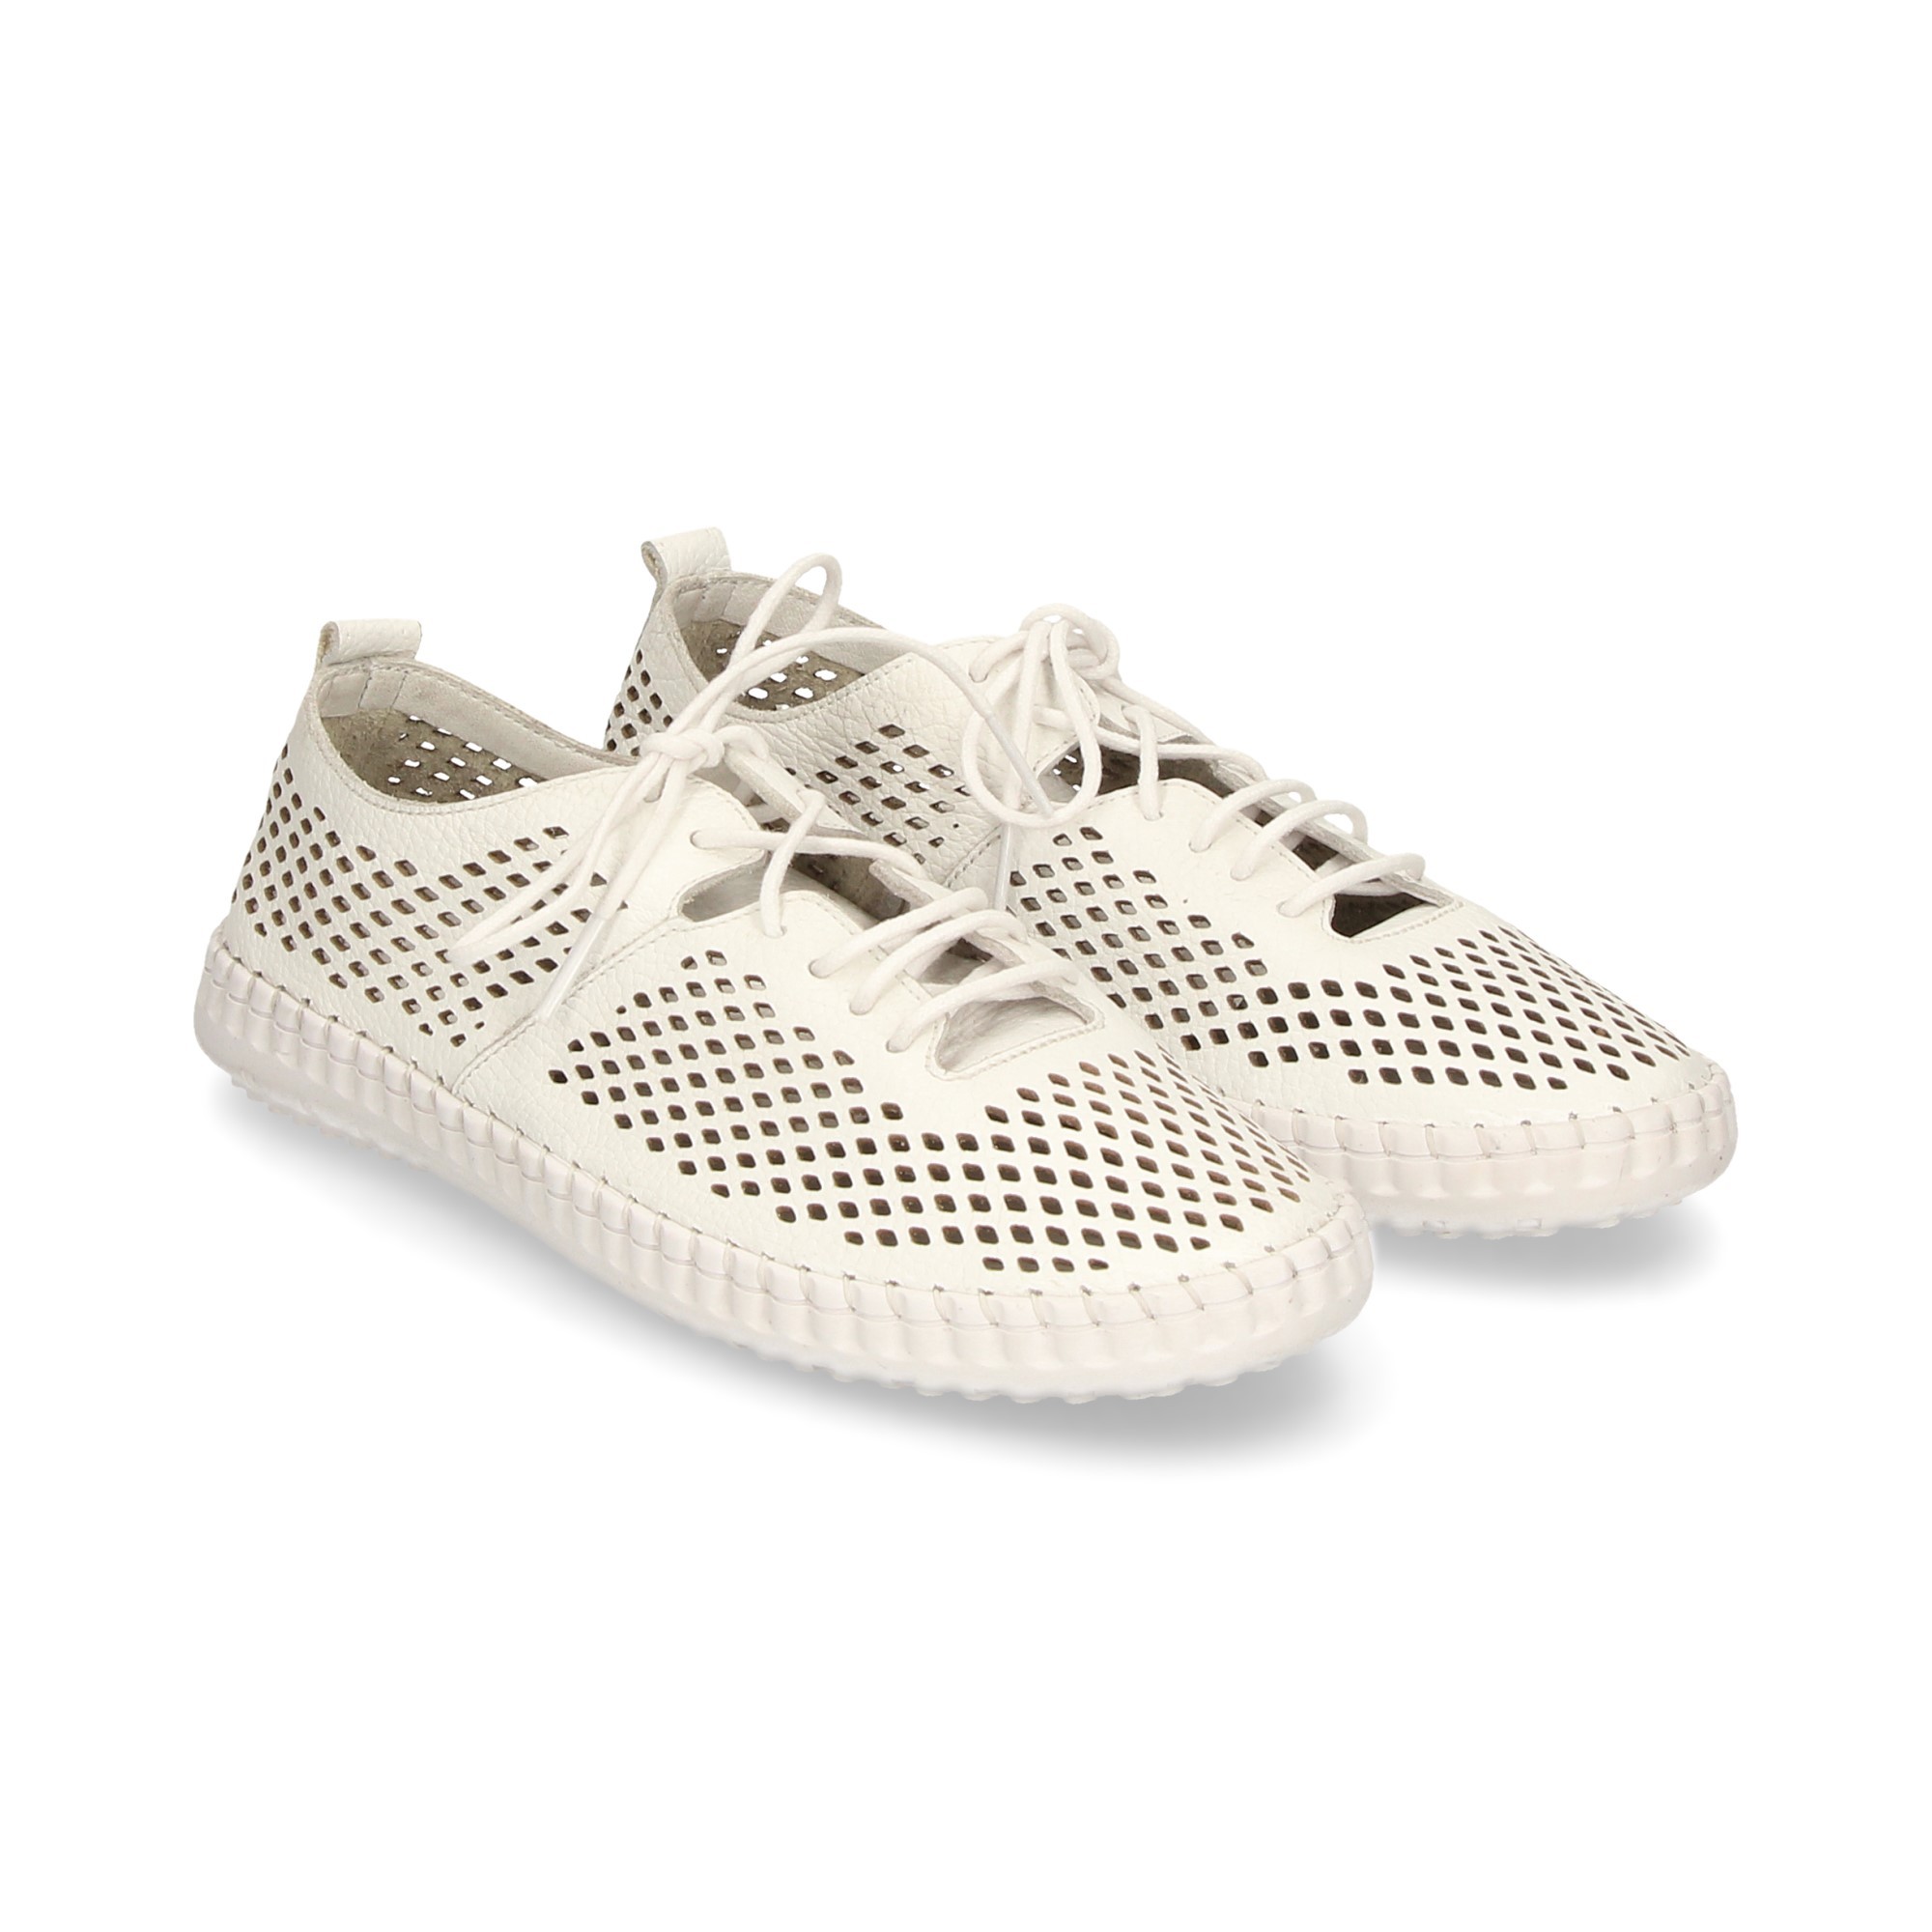 sporty-perforated-weisse-haut